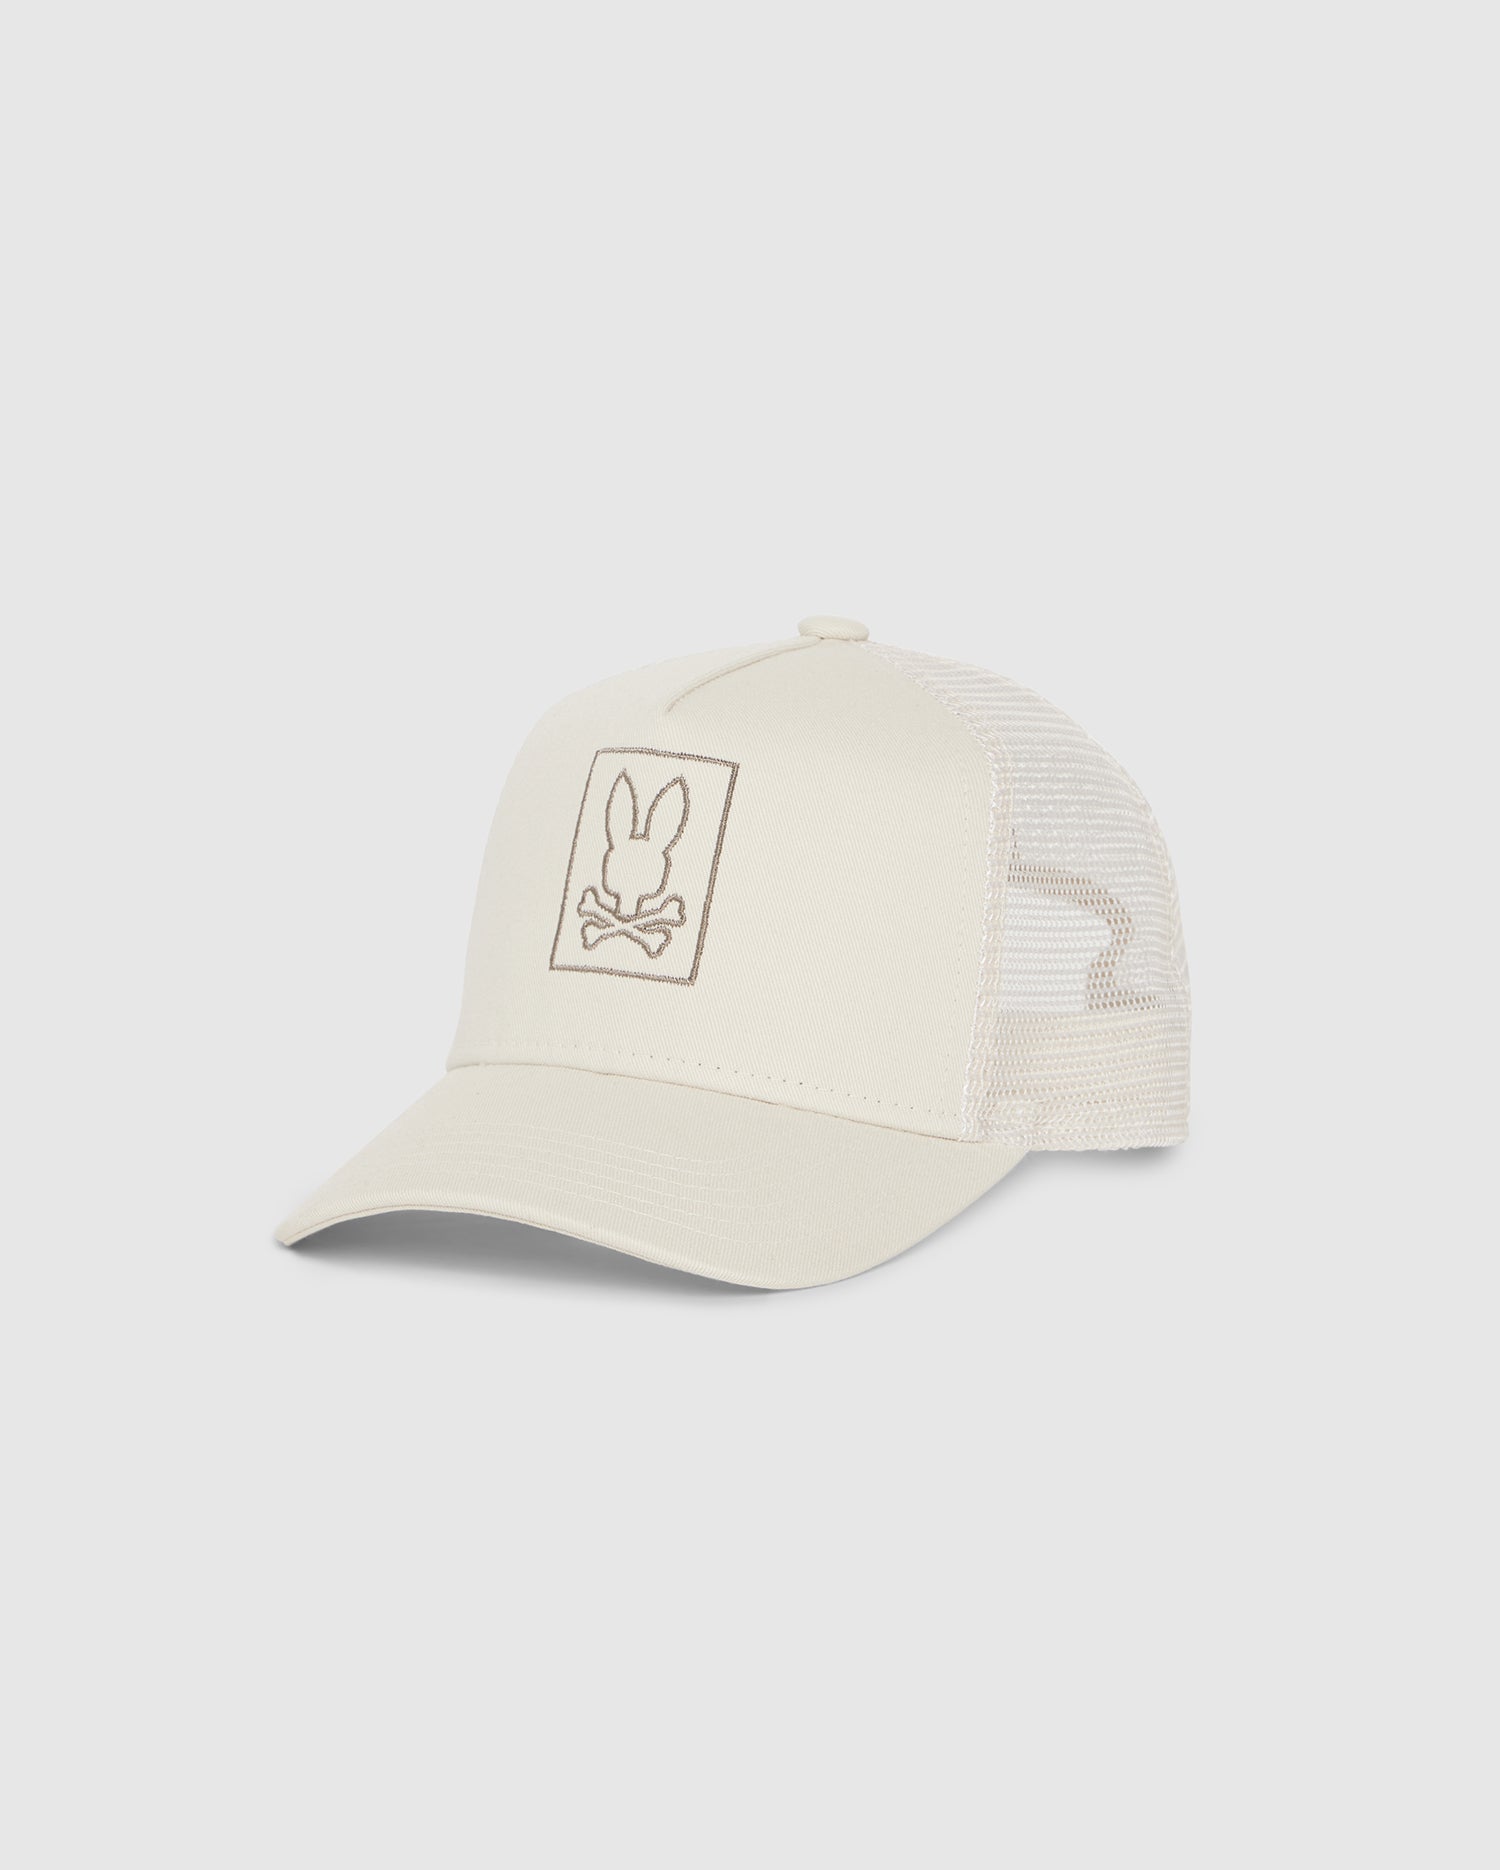 A Psycho Bunny KIDS LIVINGSTON TRUCKER CAP - B0A401B200 in beige featuring an embroidered peace sign resembling a hand gesture on the front panel, photographed on a white background.